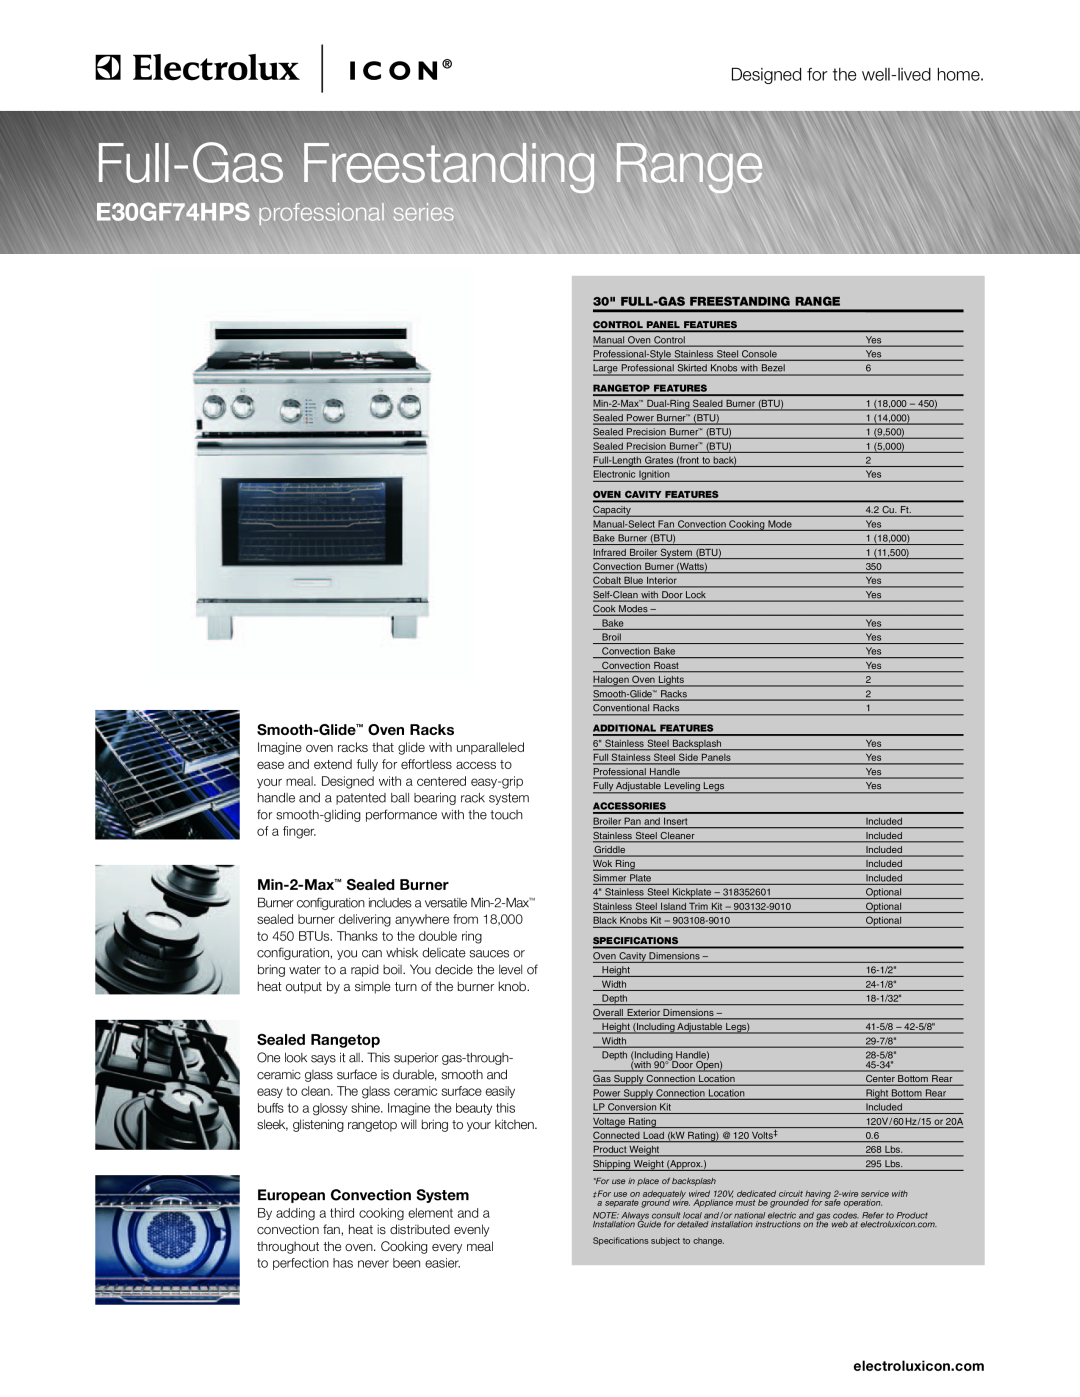 Electrolux E30GF74HPS specifications Smooth-Glide Oven Racks, Min-2-Max Sealed Burner, Sealed Rangetop, electroluxicon.com 